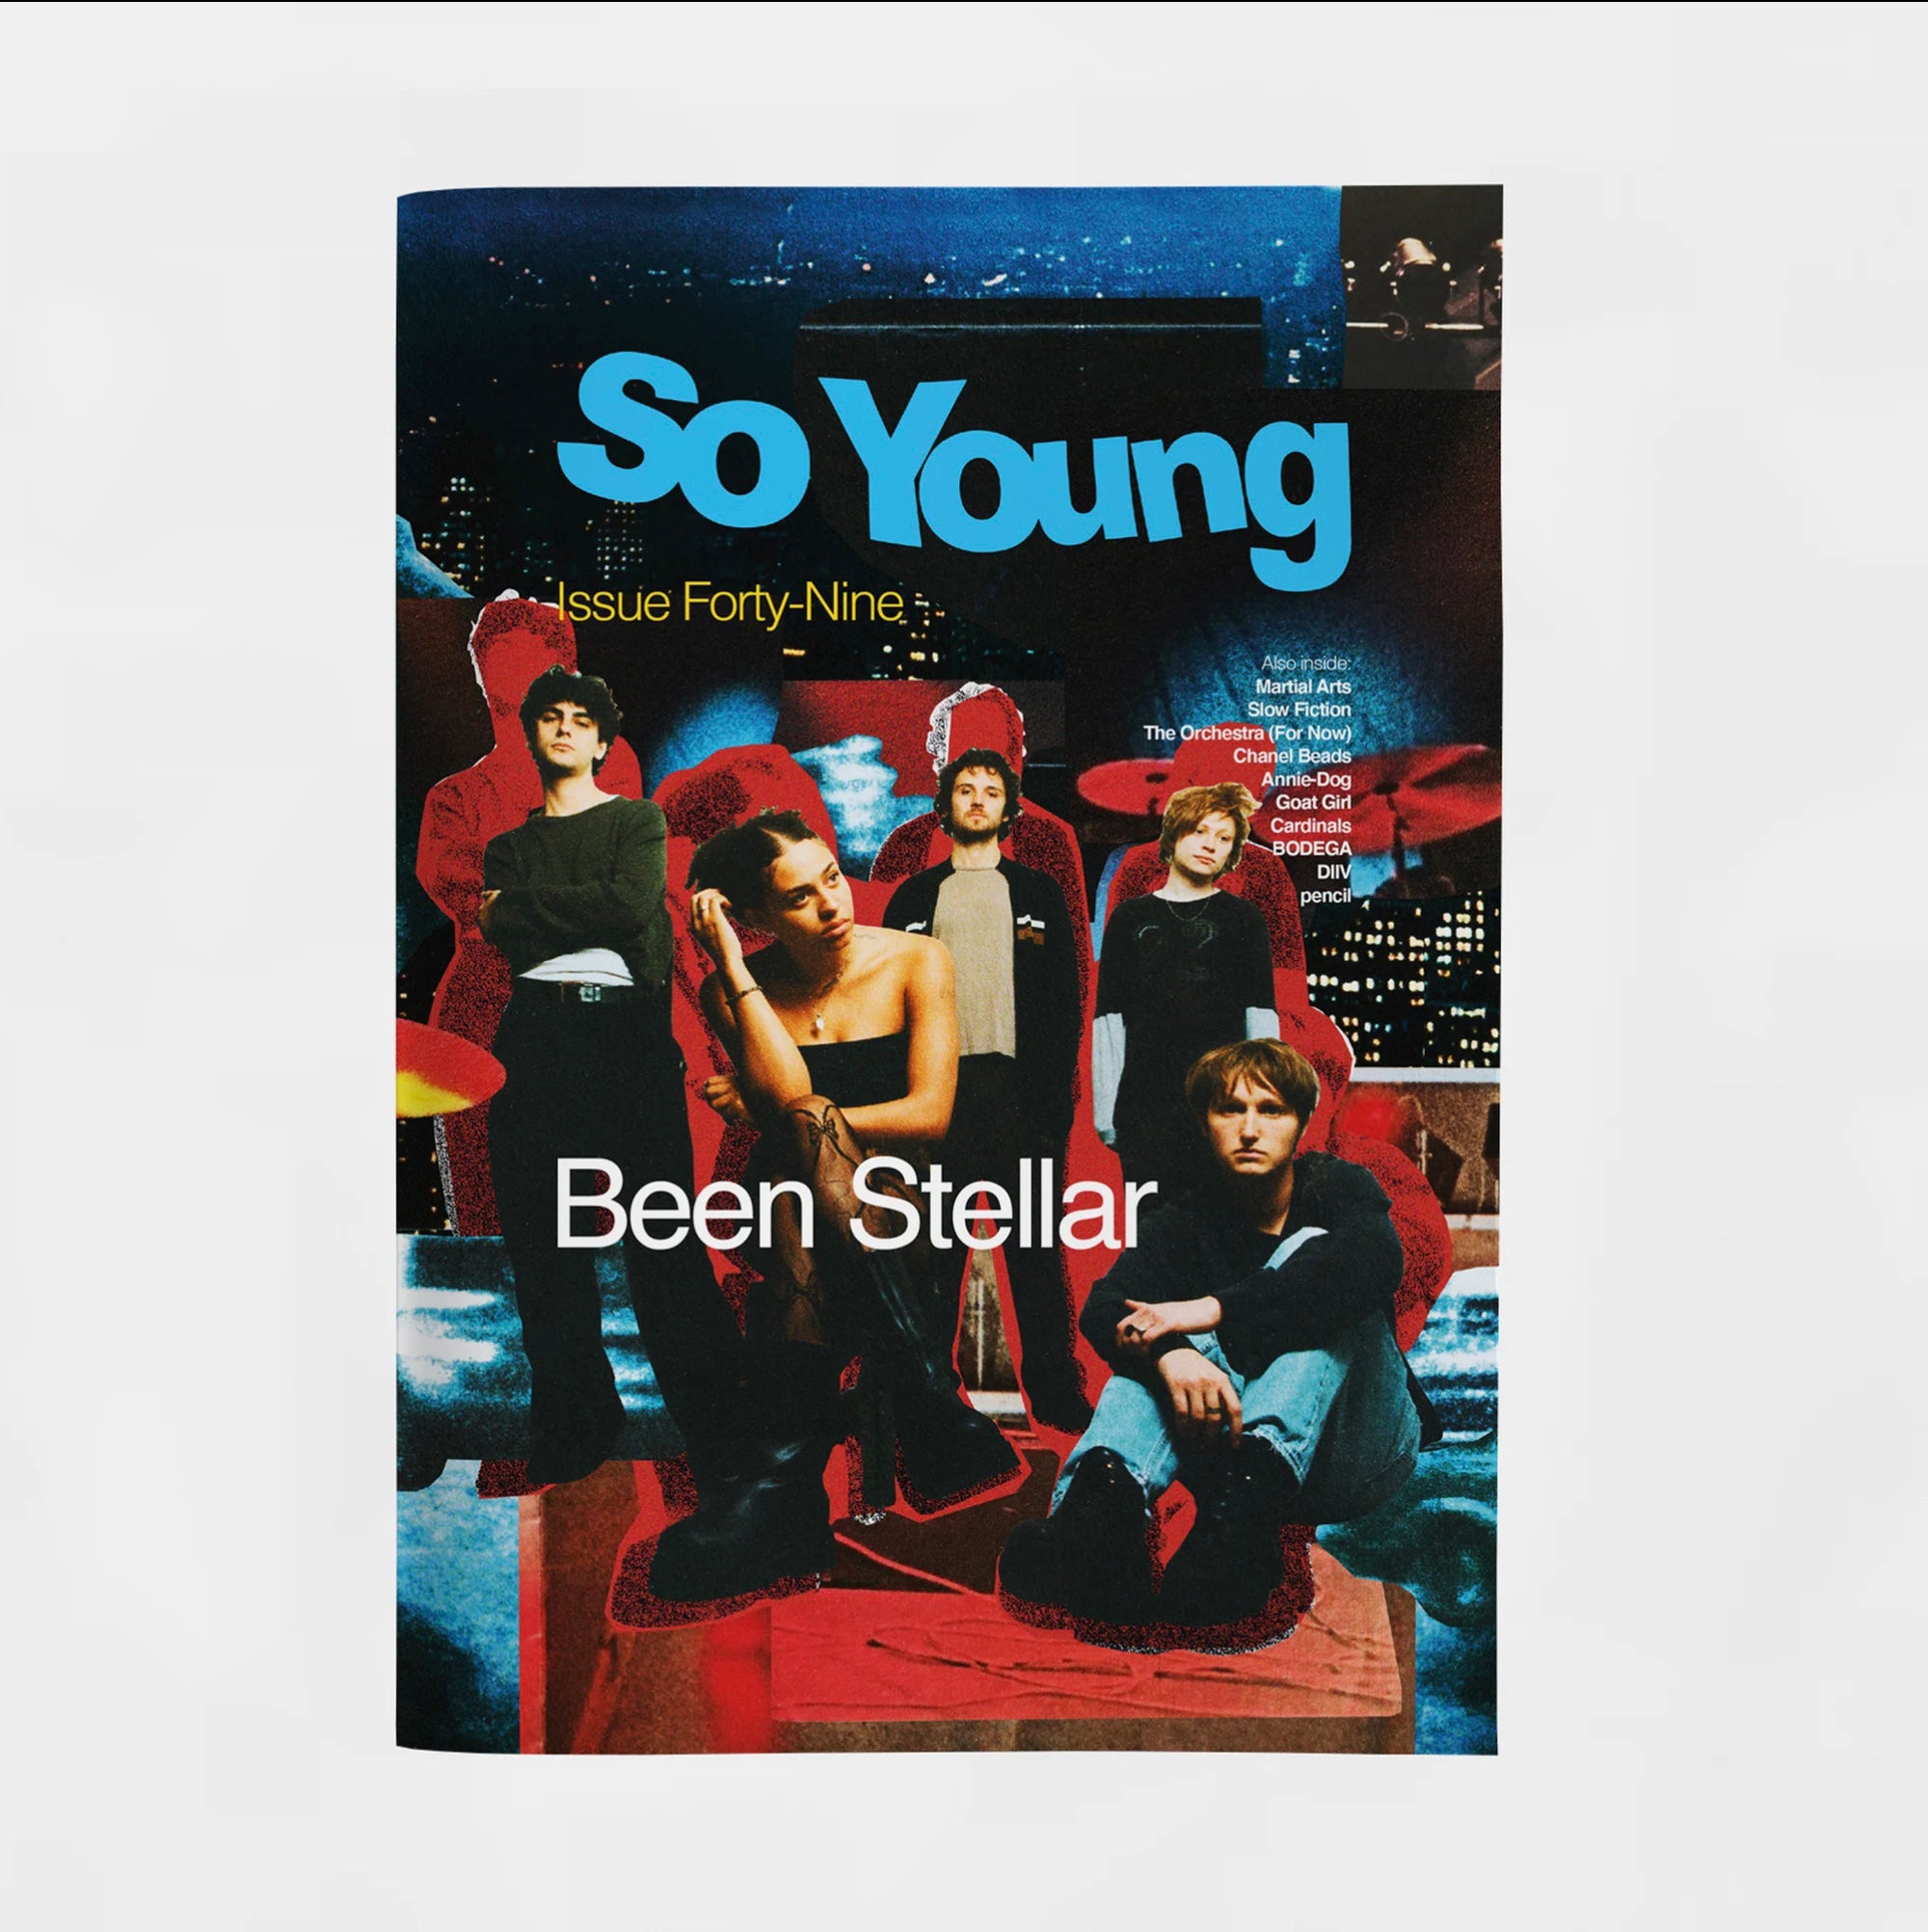 SO YOUNG MAGAZINE 'ISSUE FORTY-NINE'